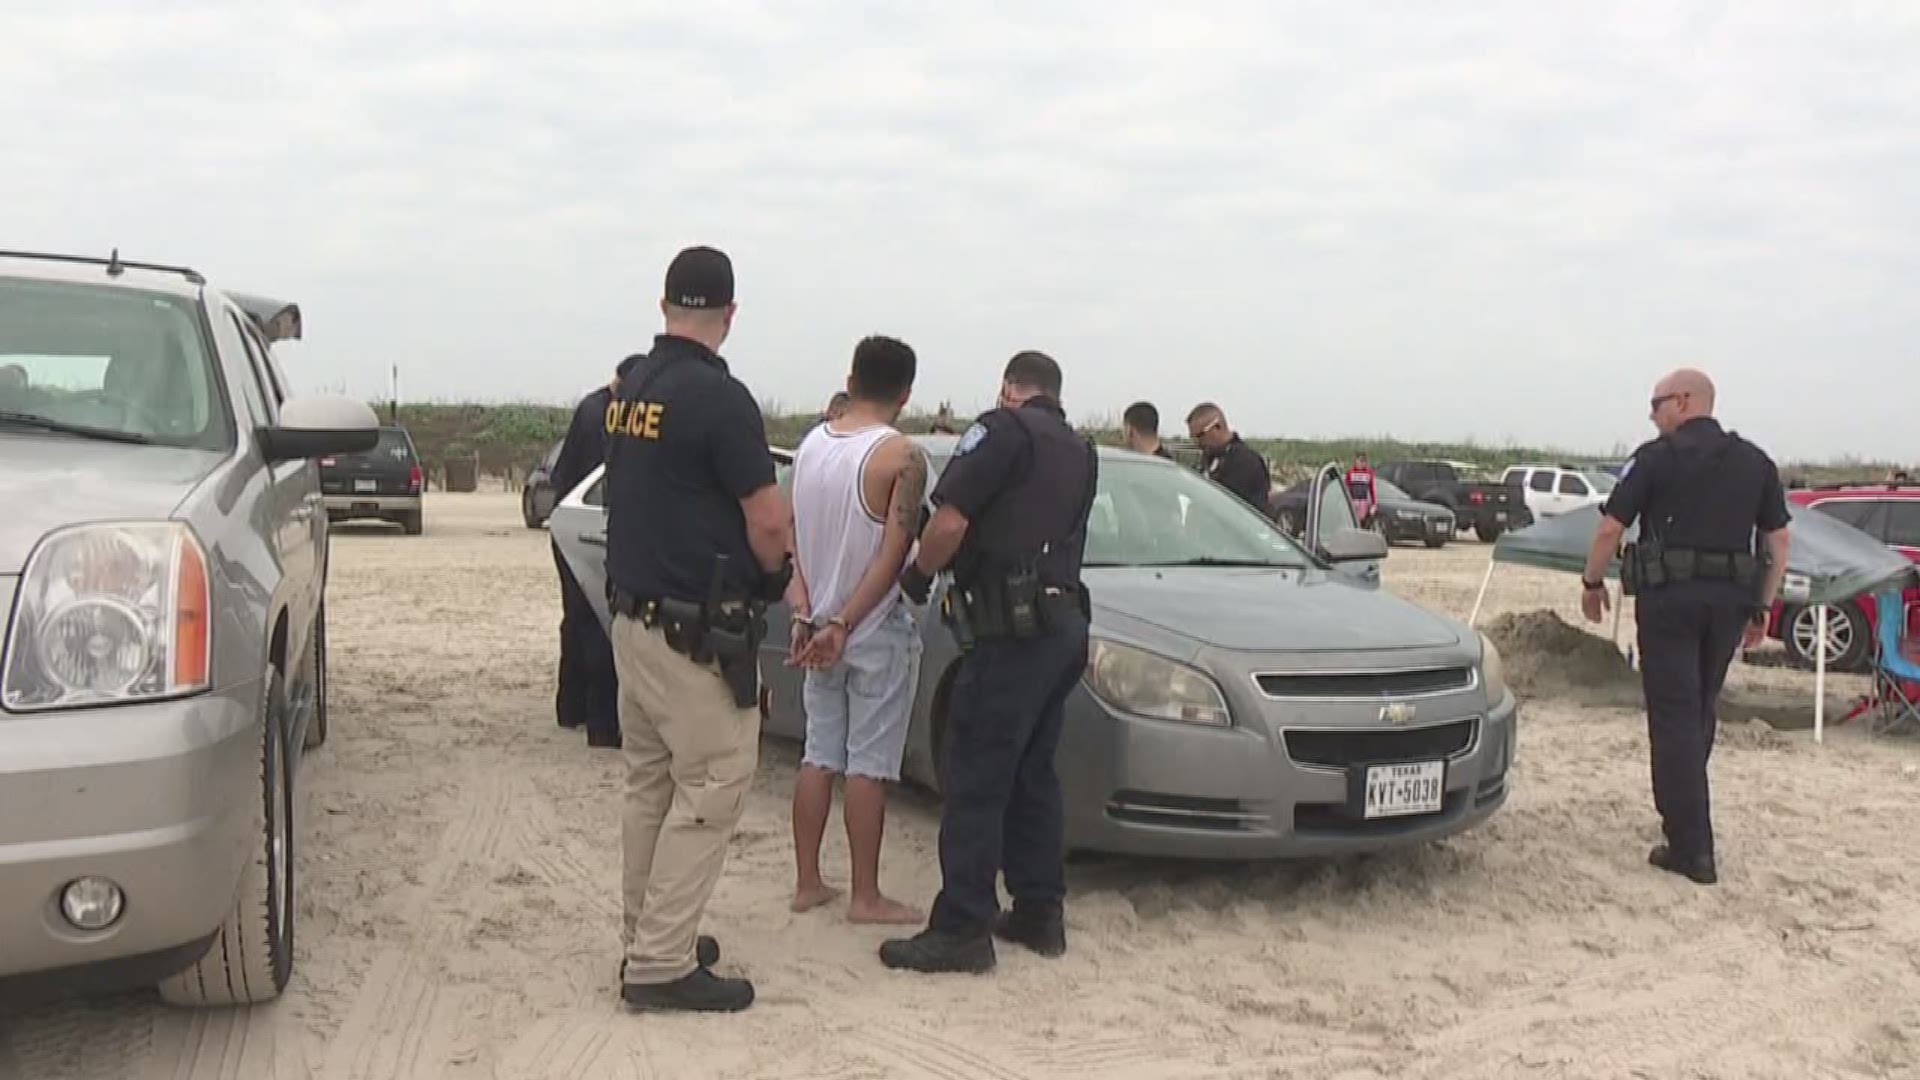 Isolated groups of young people on the beach have been keeping the Port Aransas Police Department busy this Spring Break.